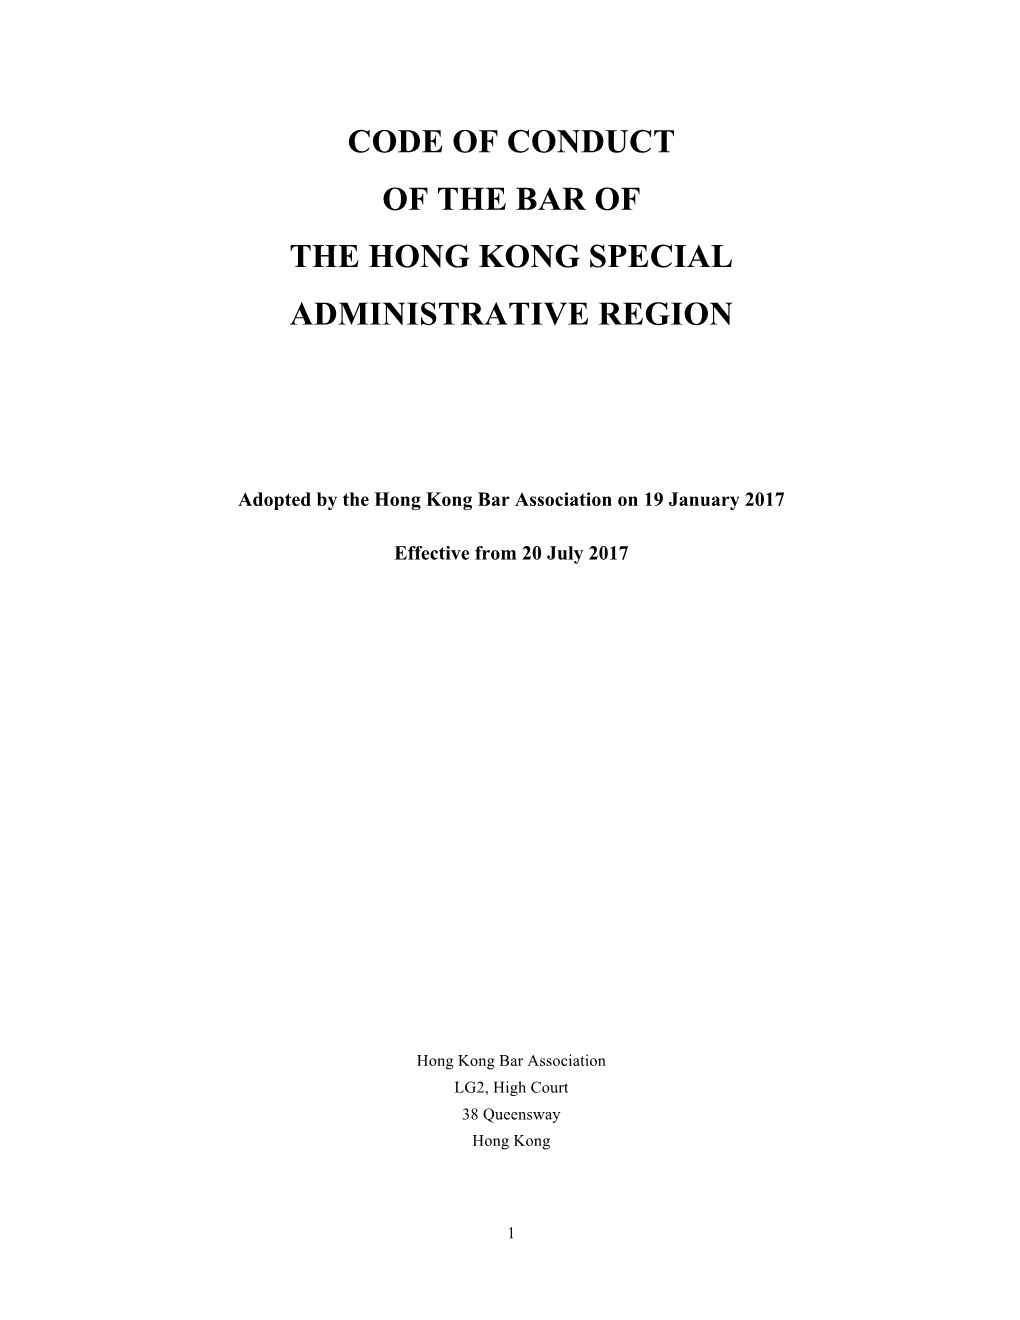 Code of Conduct of the Bar of the Hong Kong Special Administrative Region